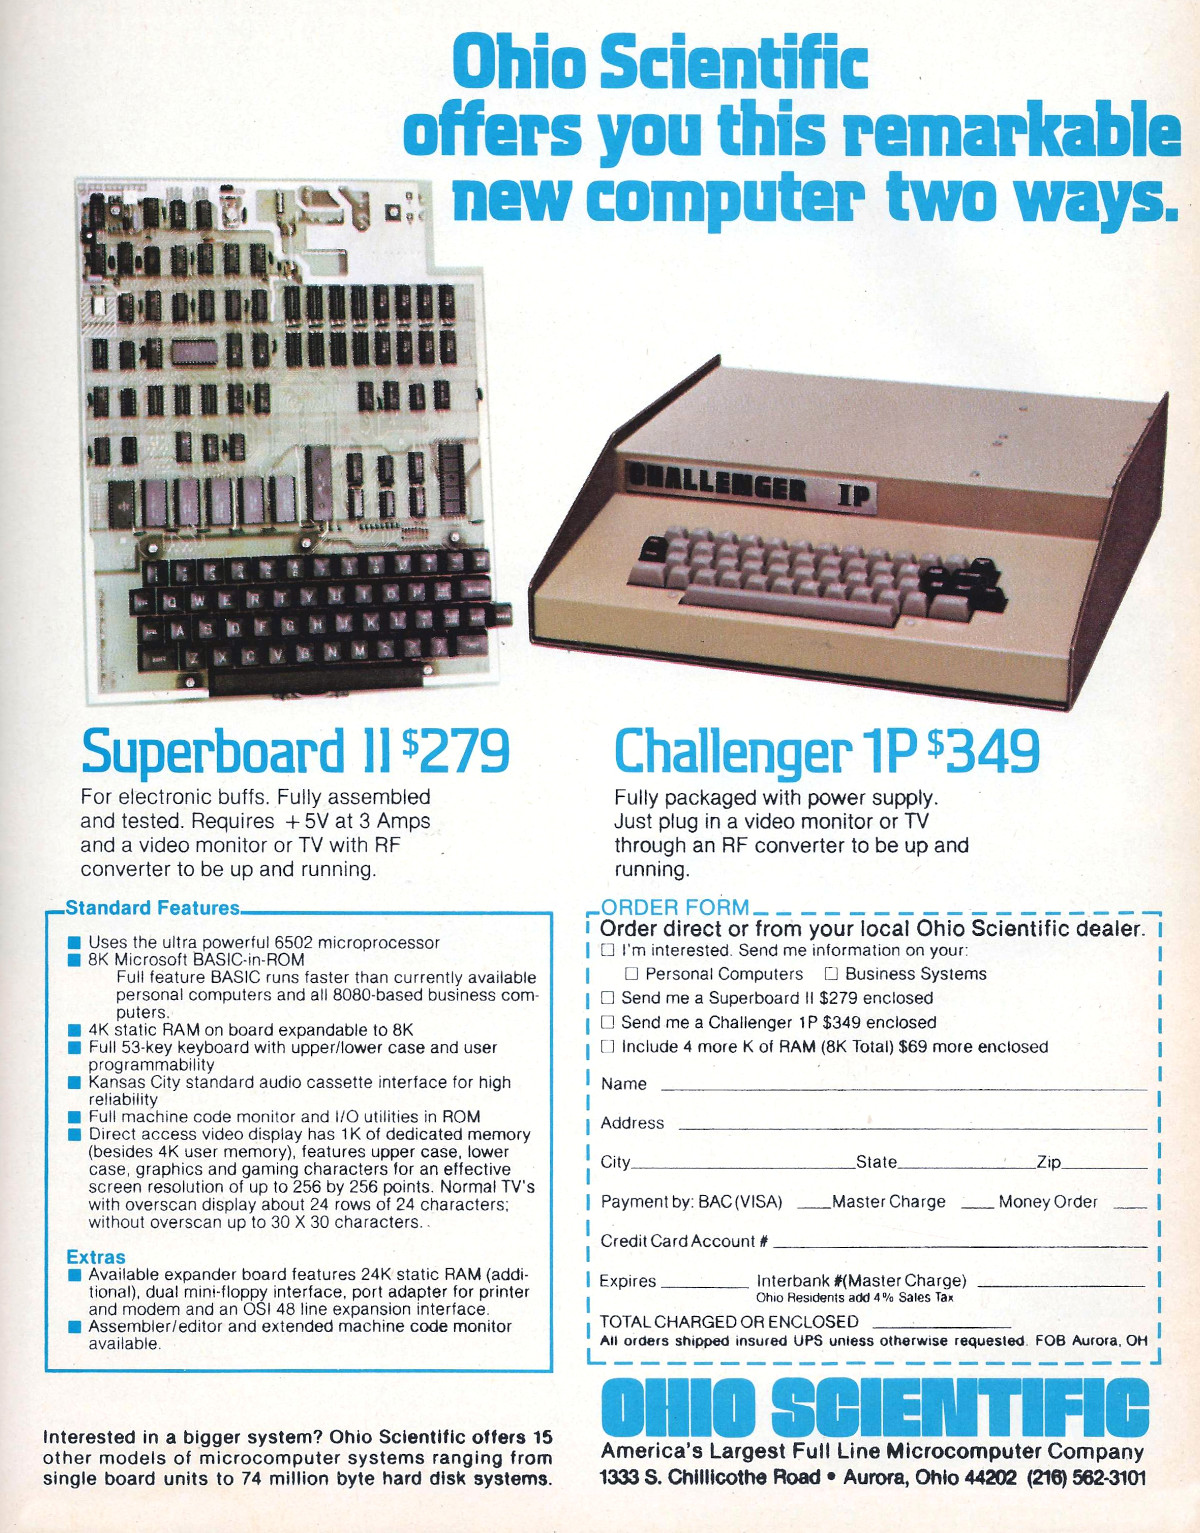 Ohio's Superboard II - the basis of many of the company's <span class='hilite'><span class='hilite'><span class='hilite'>microcomputers</span></span></span>. From Byte, December 1978